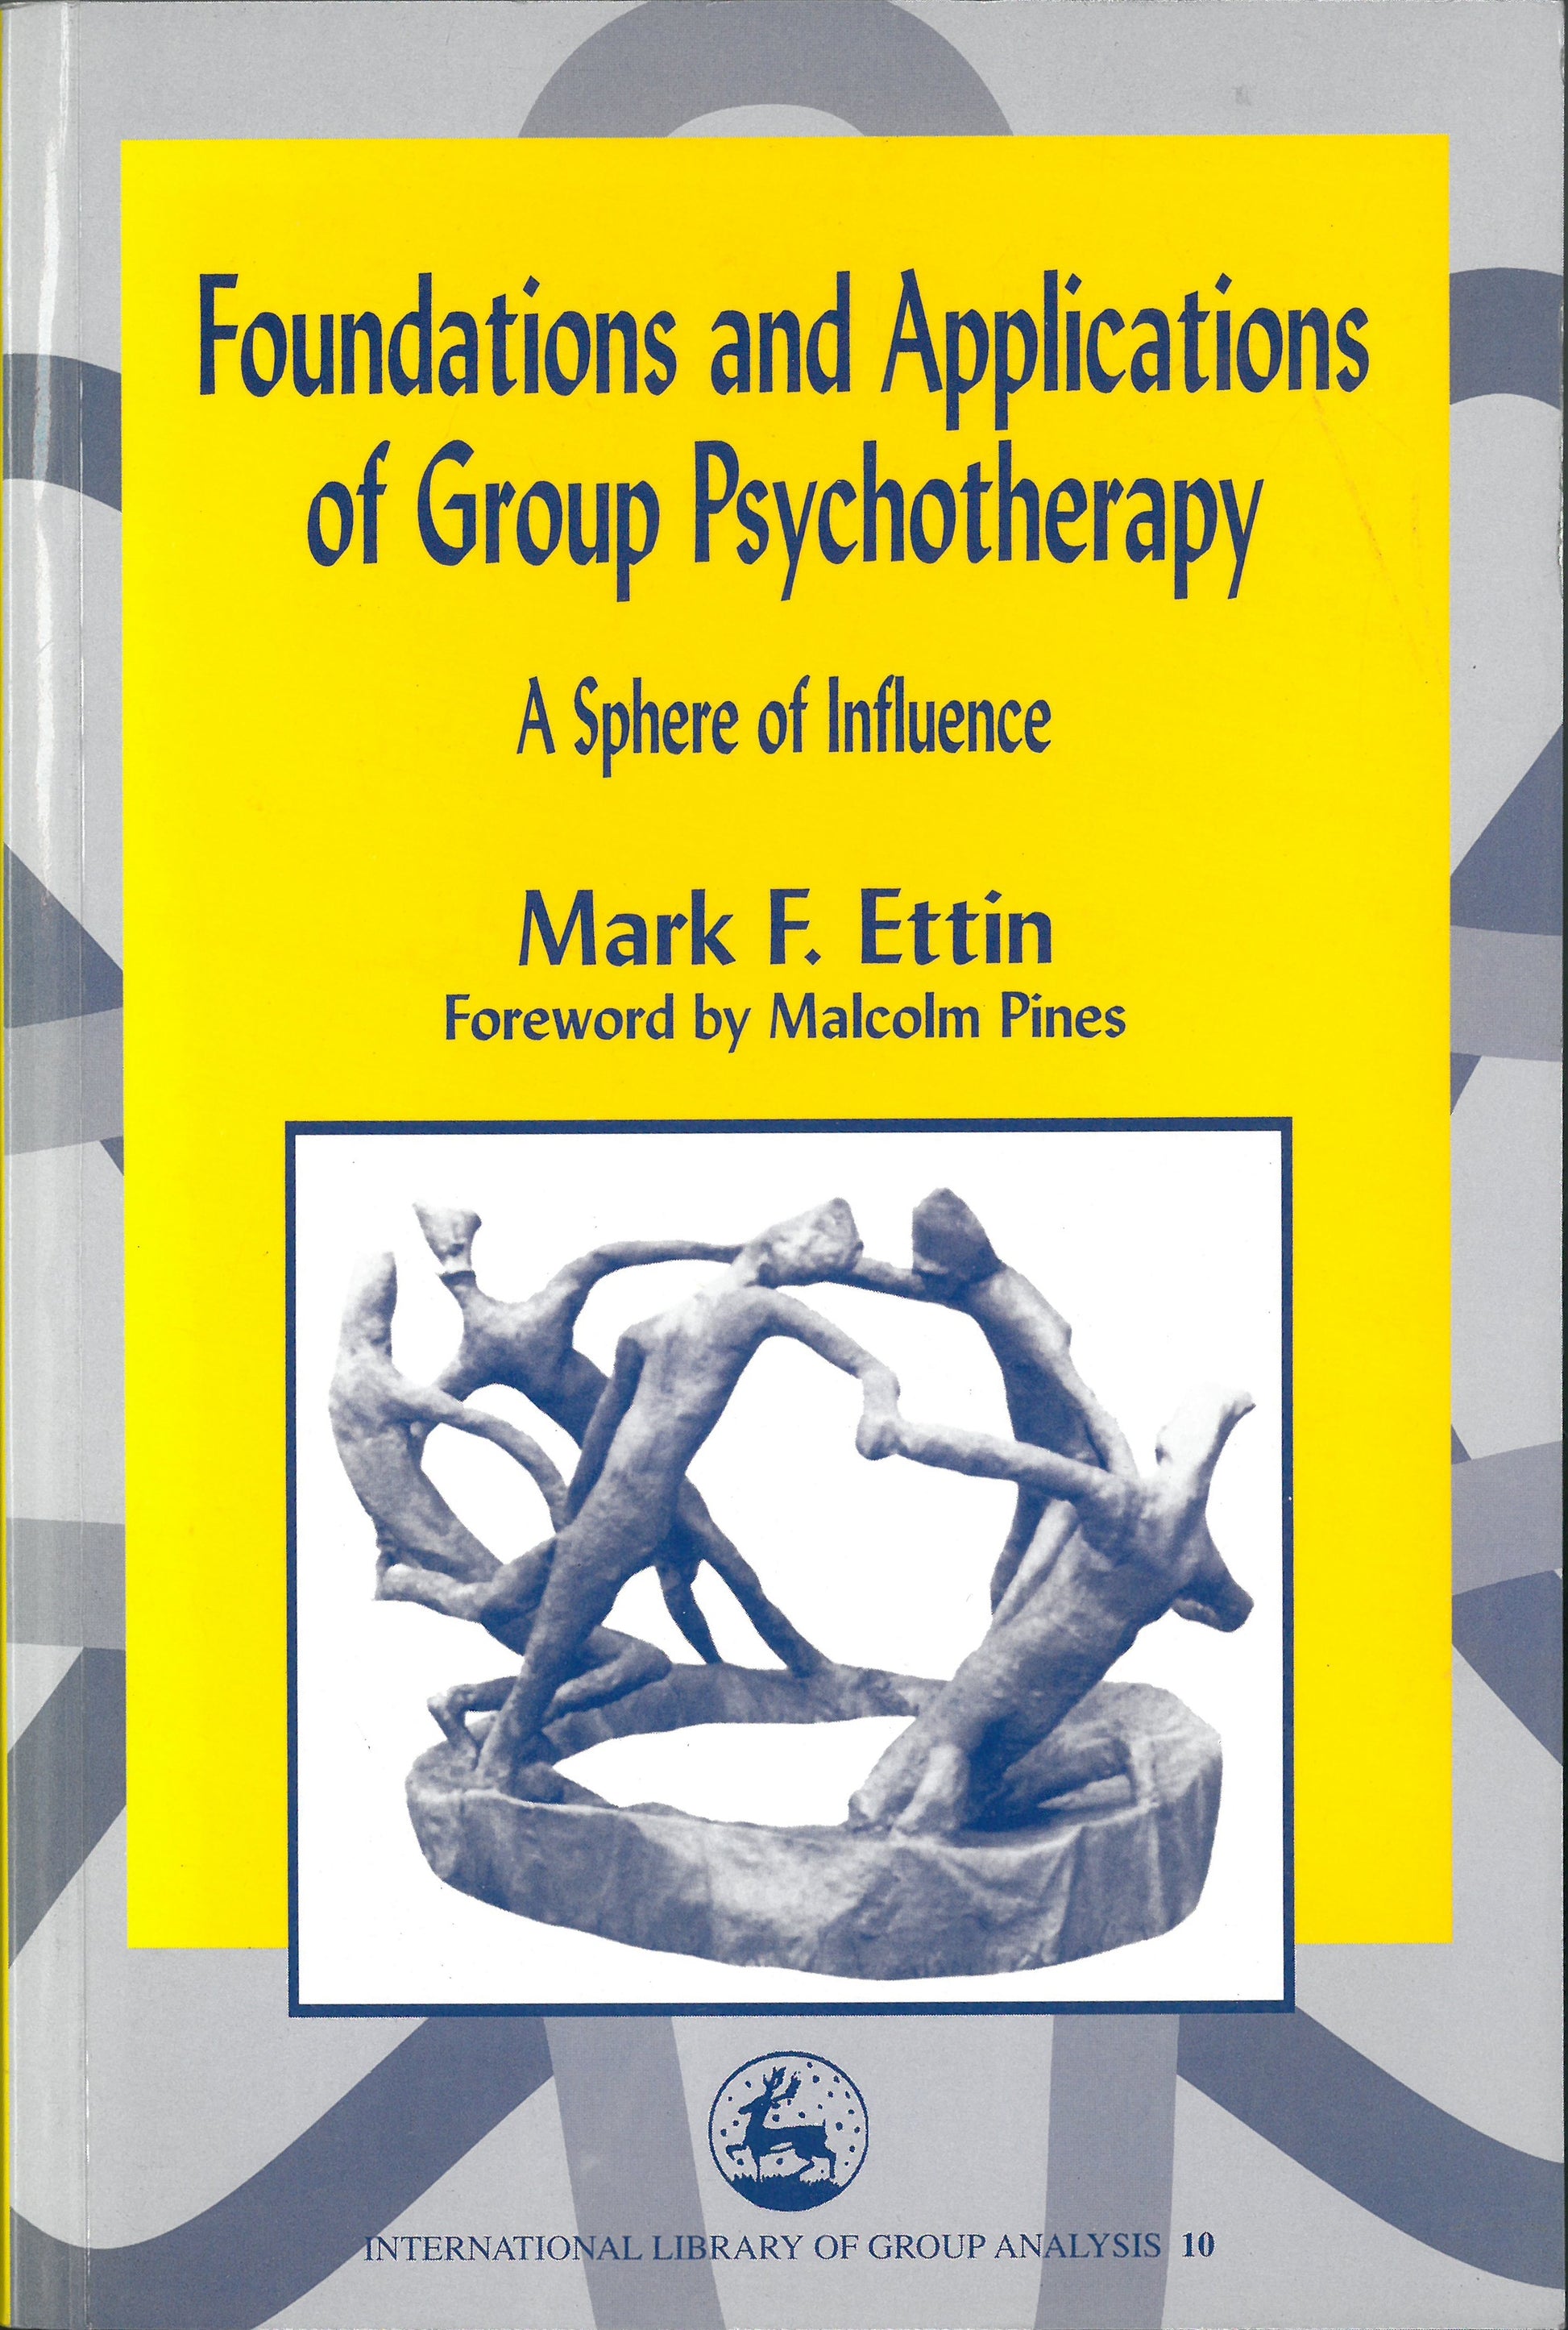 Foundations and Applications of Group Psychotherapy by Mark Ettin